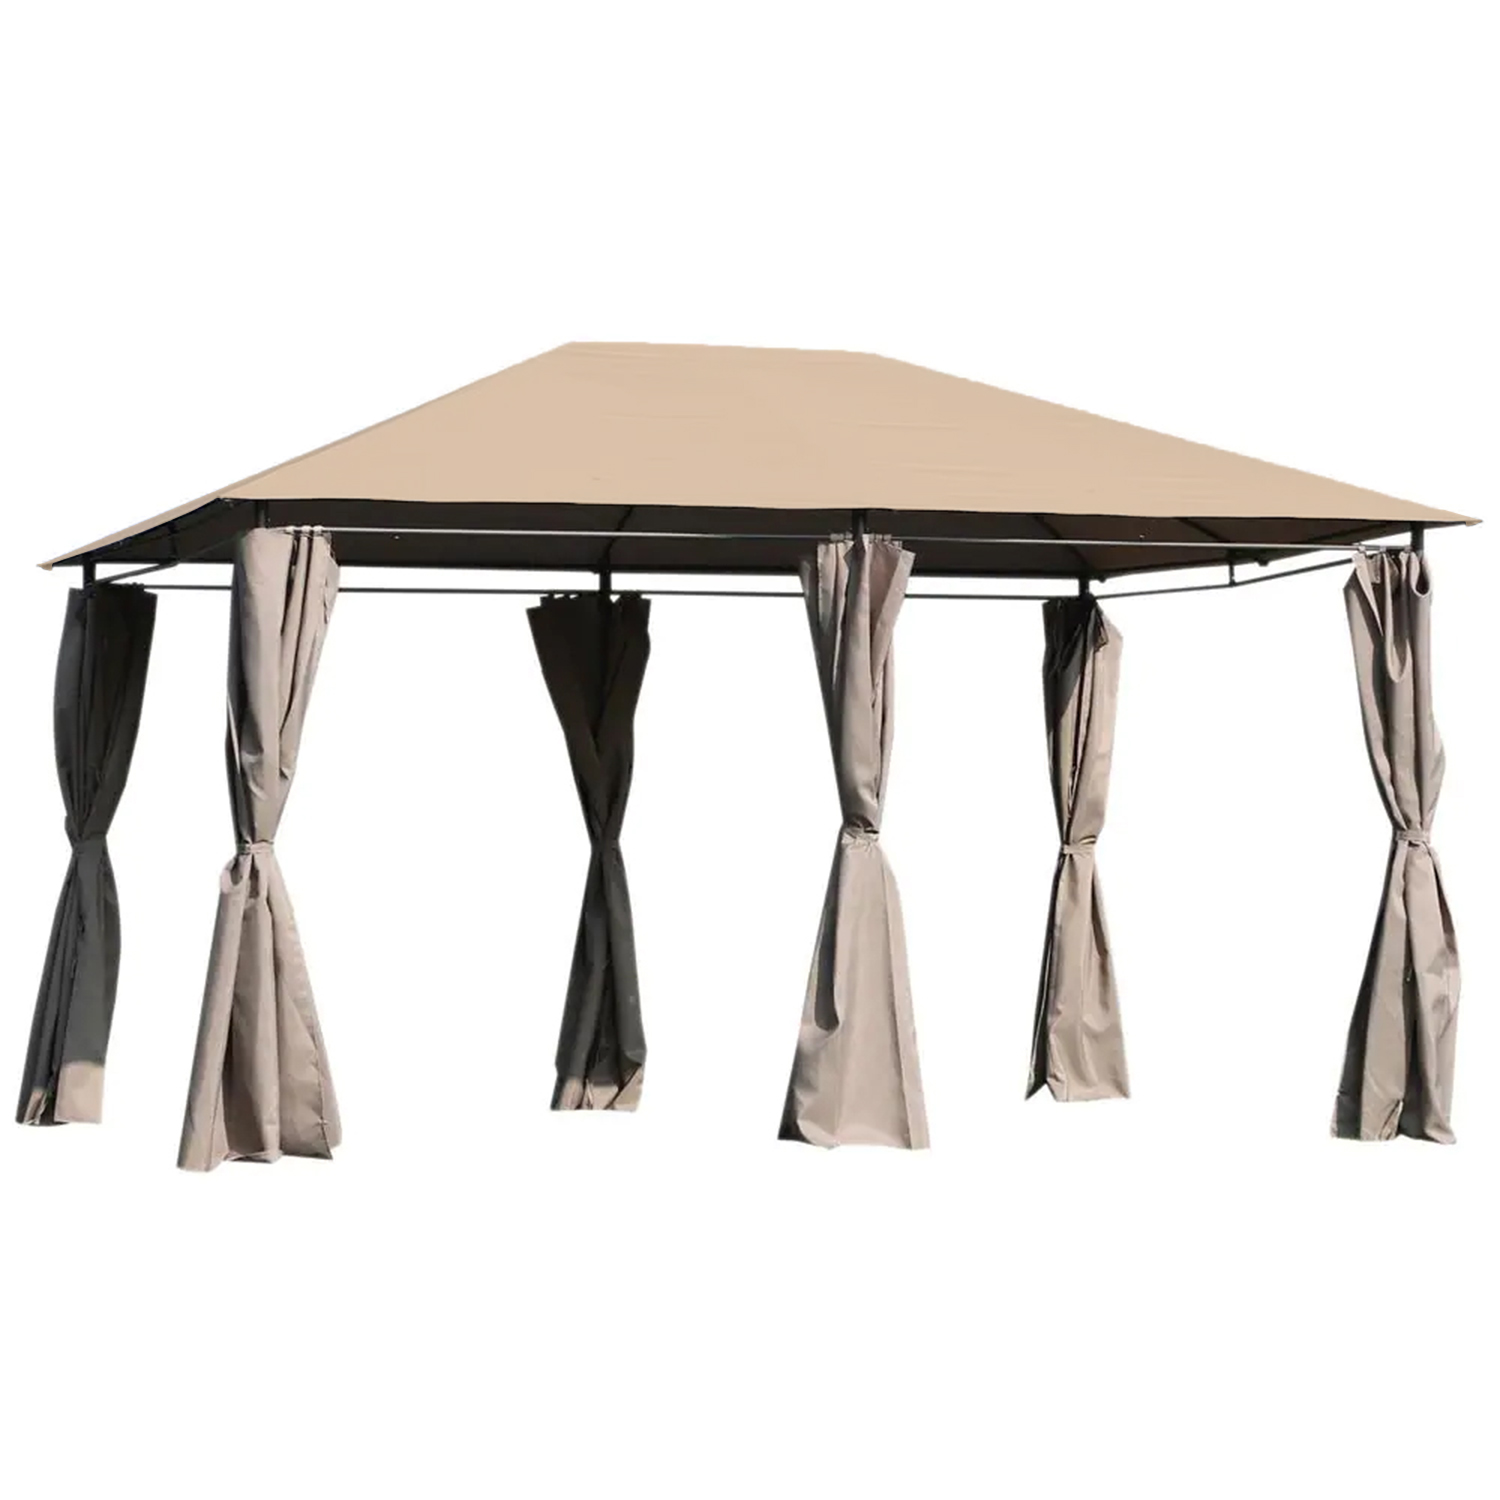 Replacement Canopy for 84C-116 Gazebo - Riplock 350